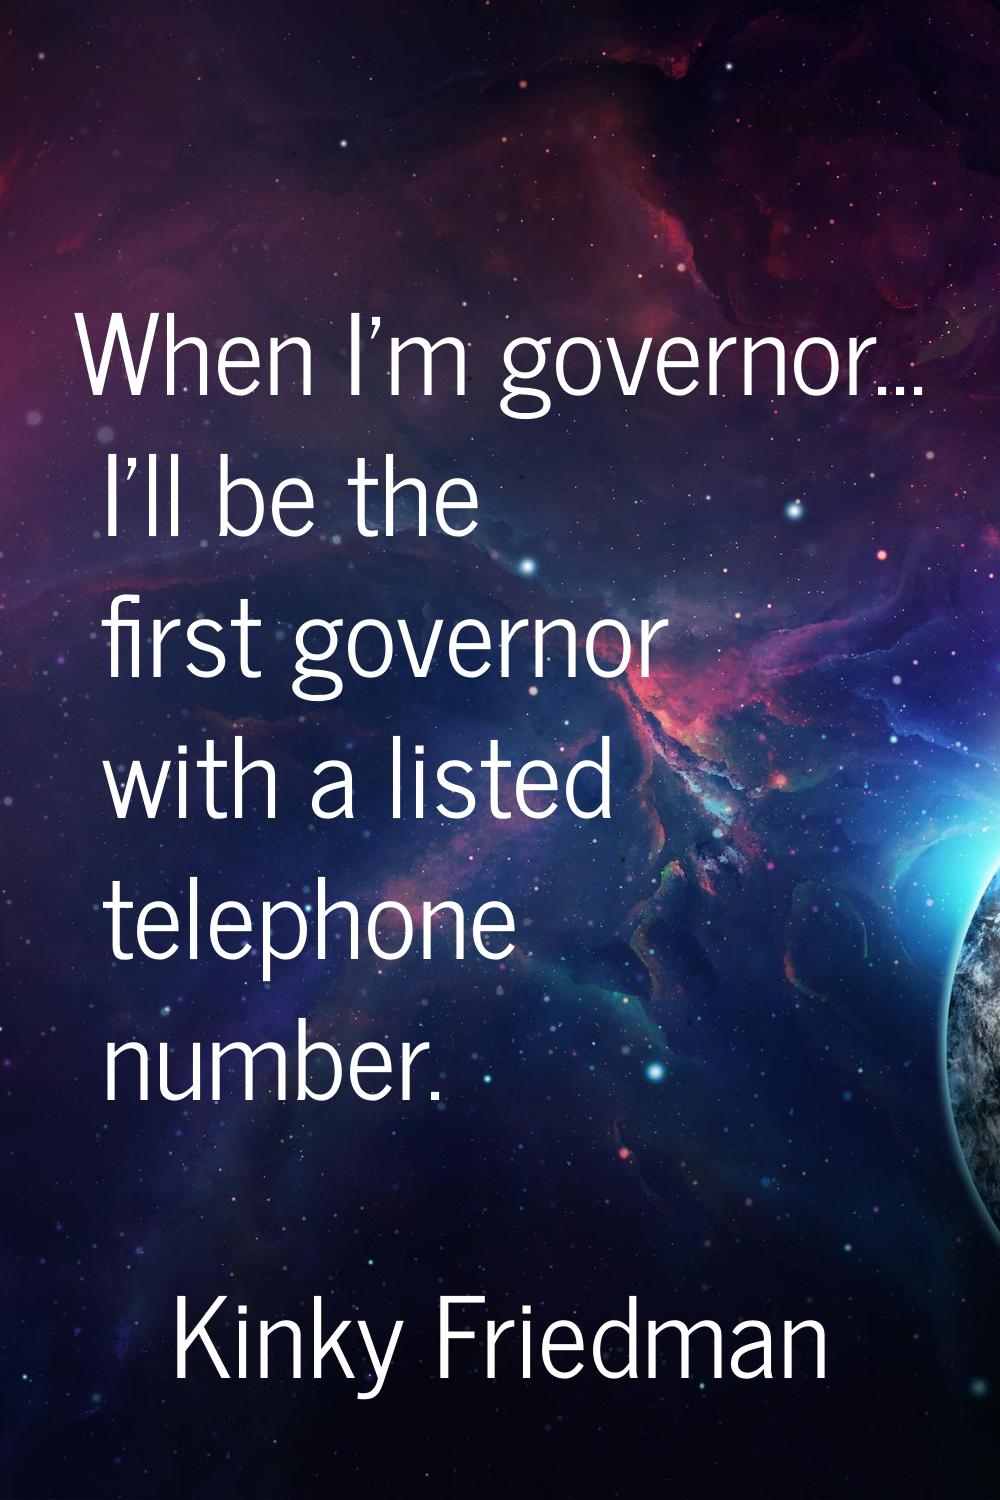 When I'm governor... I'll be the first governor with a listed telephone number.